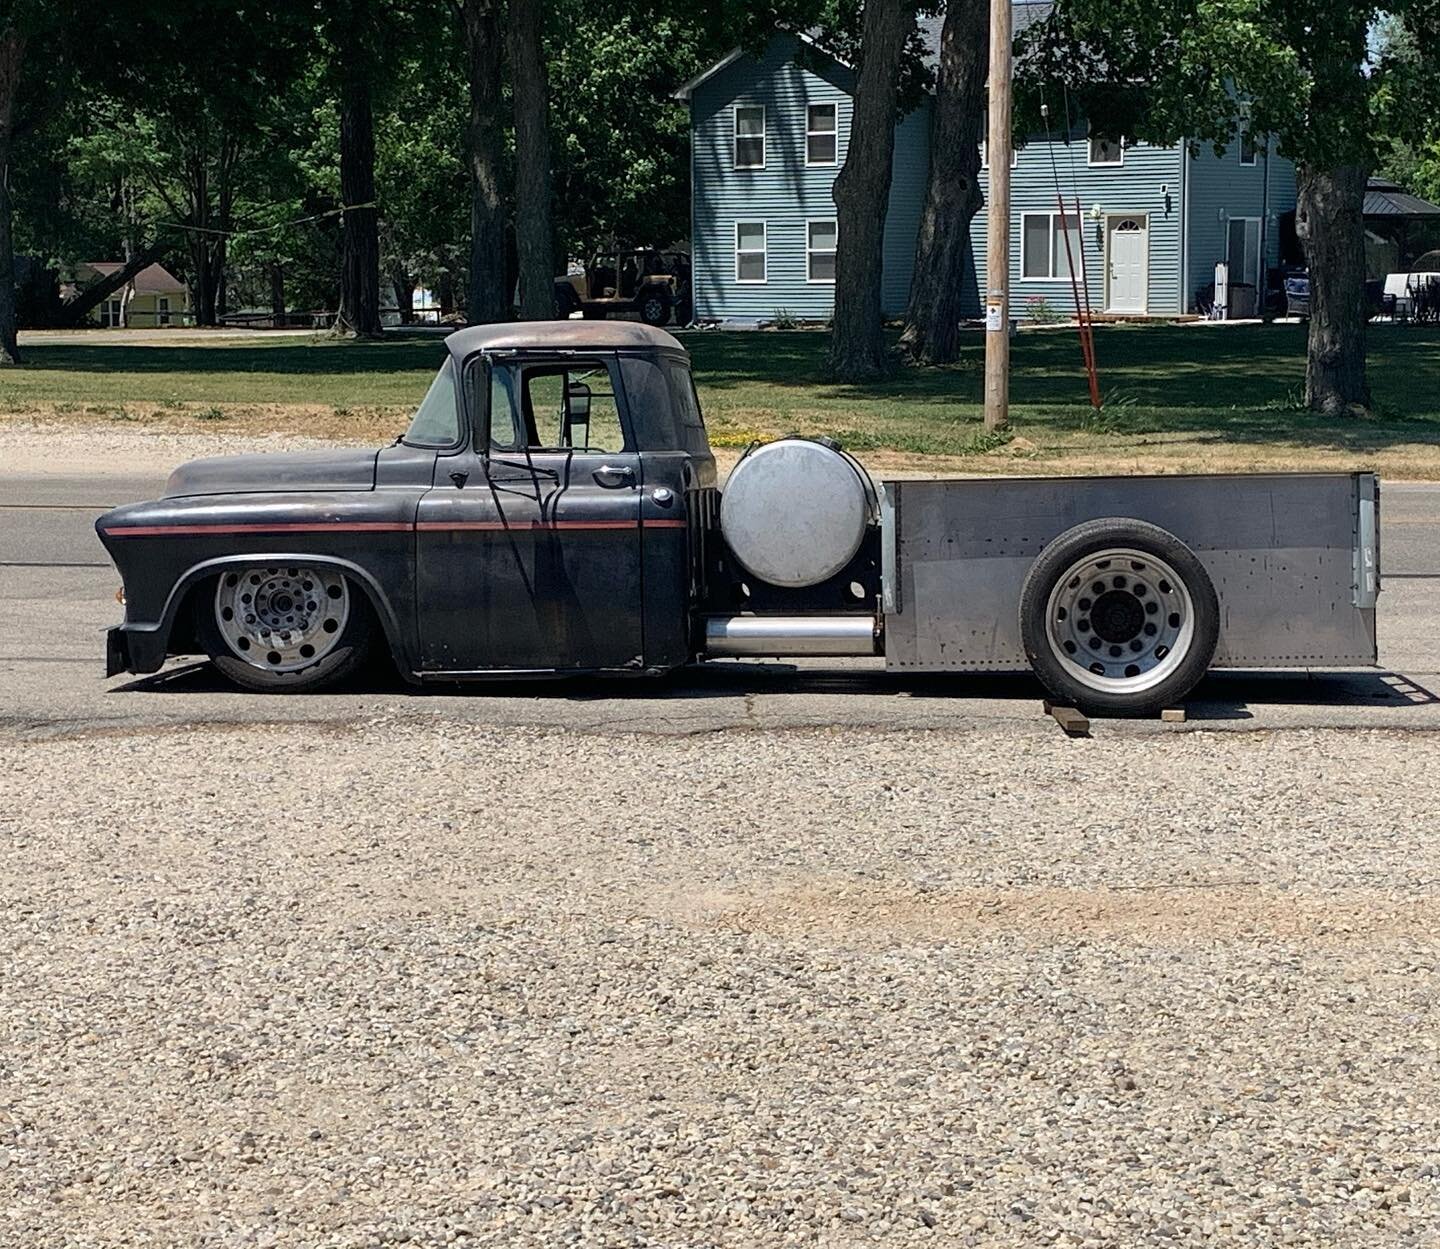 Pulled the 55 out to get some sun. I needed to see how the bumpers looked out in the sun #gsimachineandfabrication #cumminsswap #dually #duallywheels #duallyporn #bigwheelduallys #drivenrodncustoms